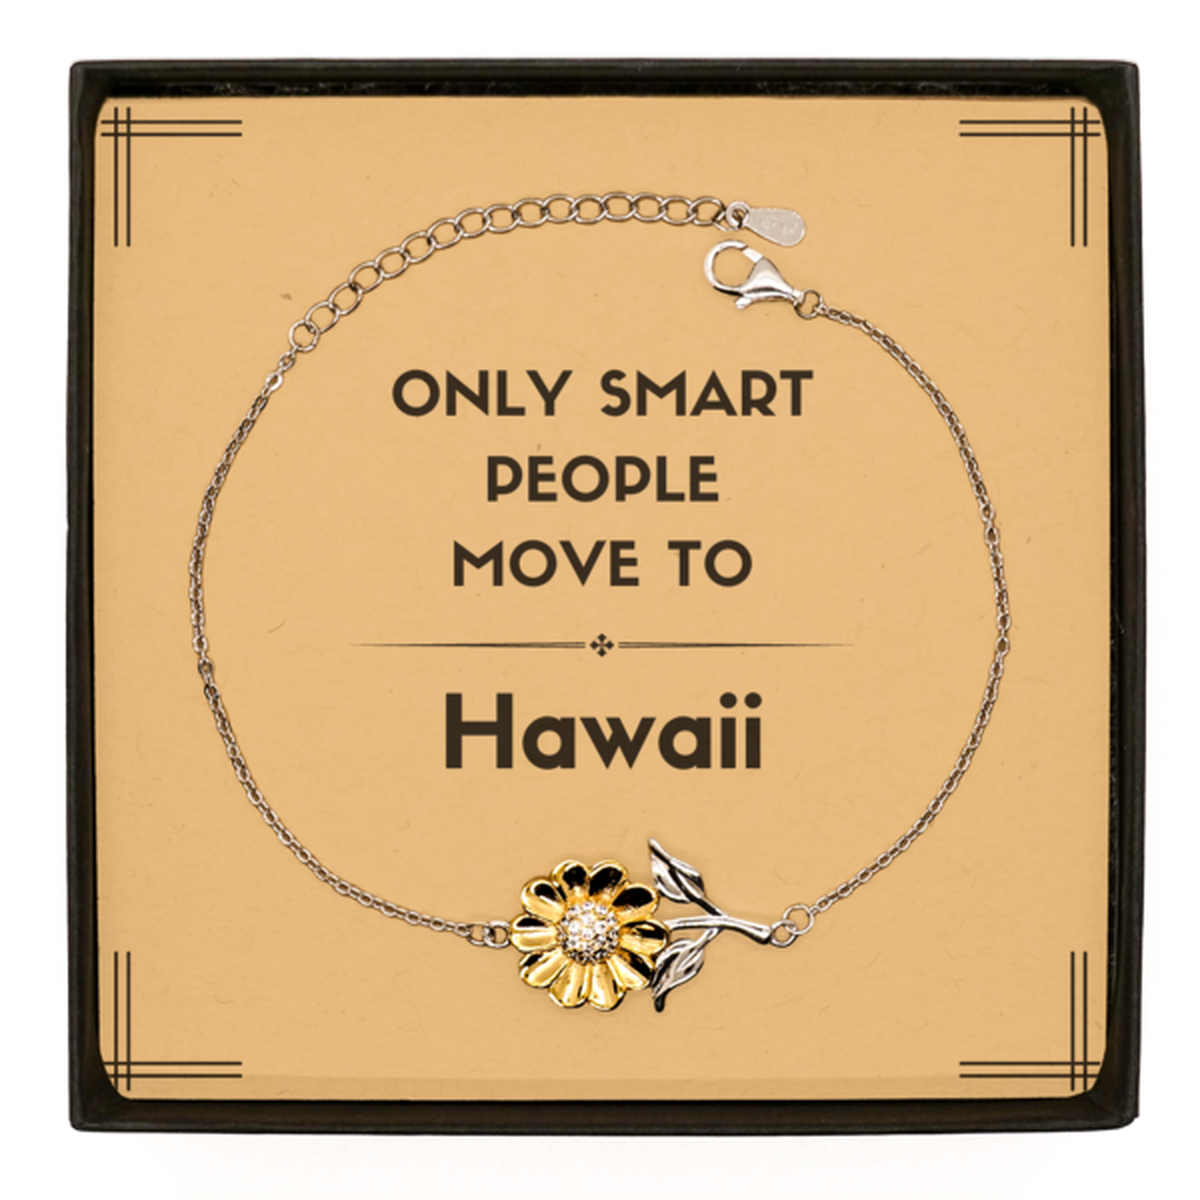 Only smart people move to Hawaii Sunflower Bracelet, Message Card Gifts For Hawaii, Move to Hawaii Gifts for Friends Coworker Funny Saying Quote